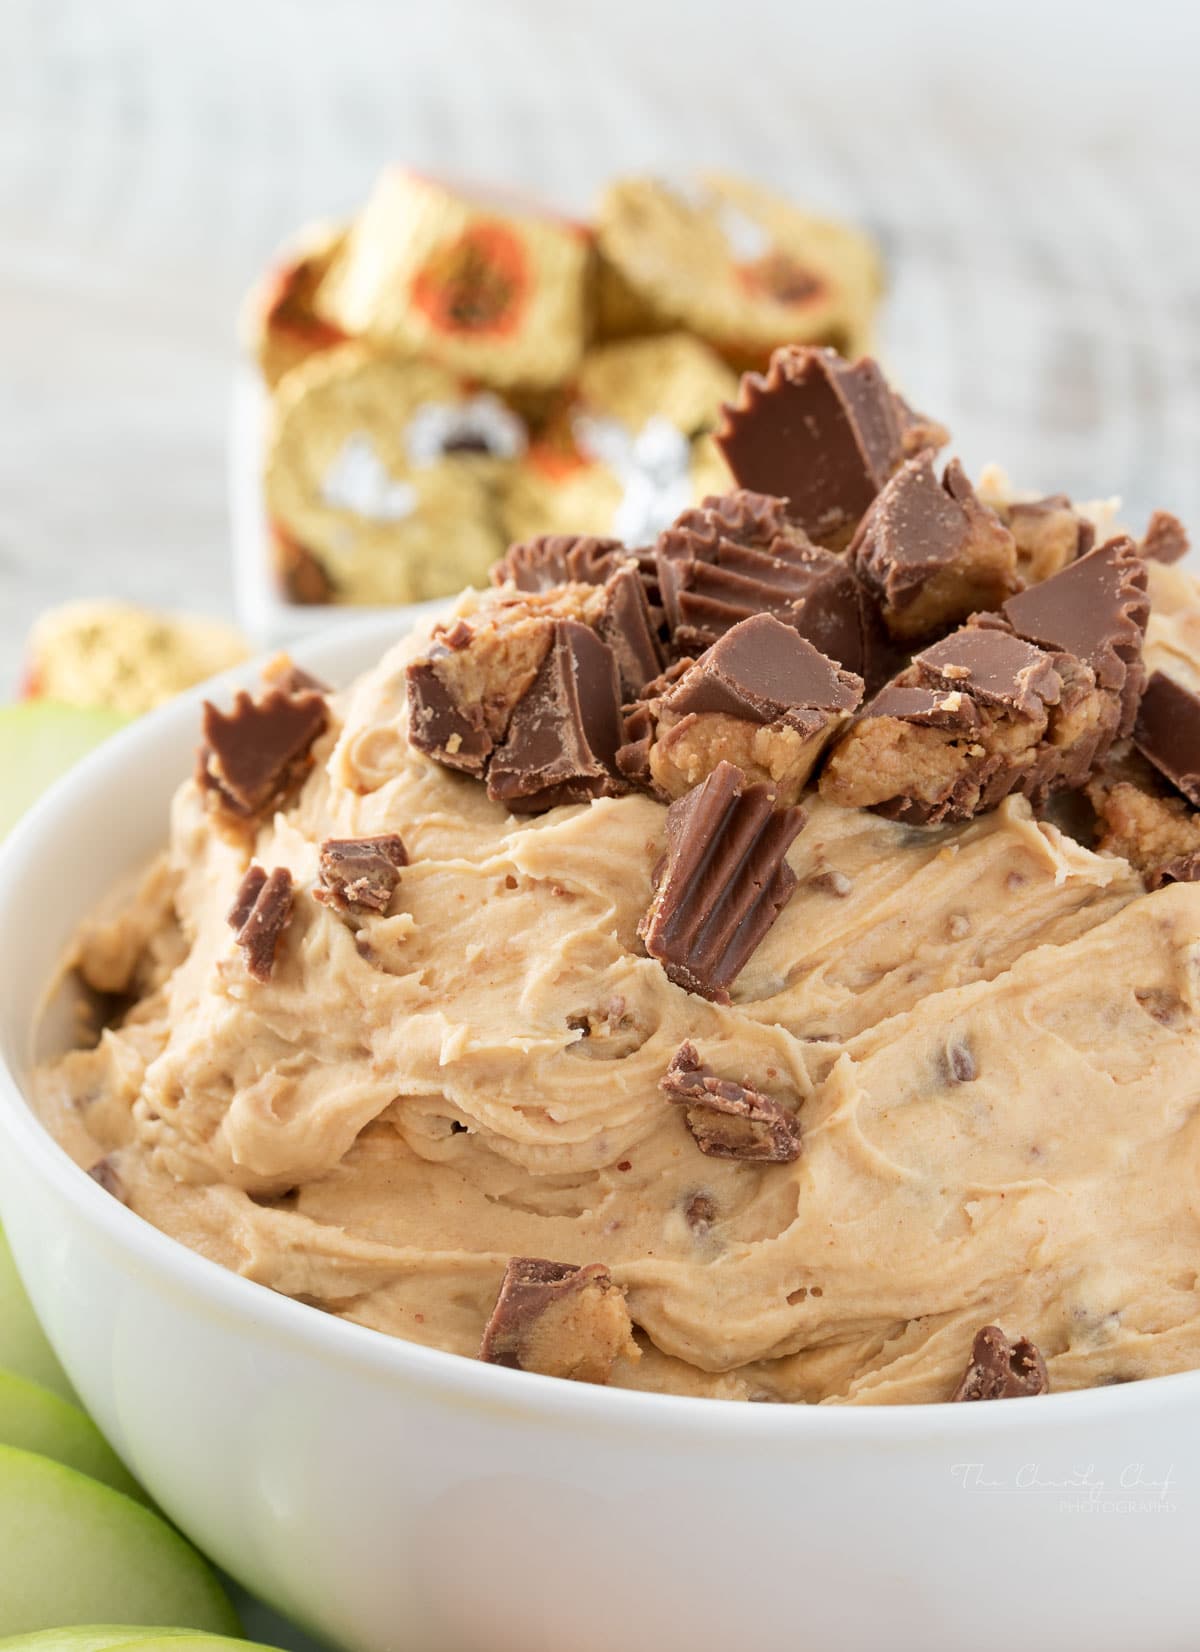 Peanut Butter Cup Cheesecake Dip | Easy to make, this cheesecake dip is loaded with great creamy flavors and pieces of peanut butter cups. Try it with apple slices or vanilla wafers! | http://thechunkychef.com